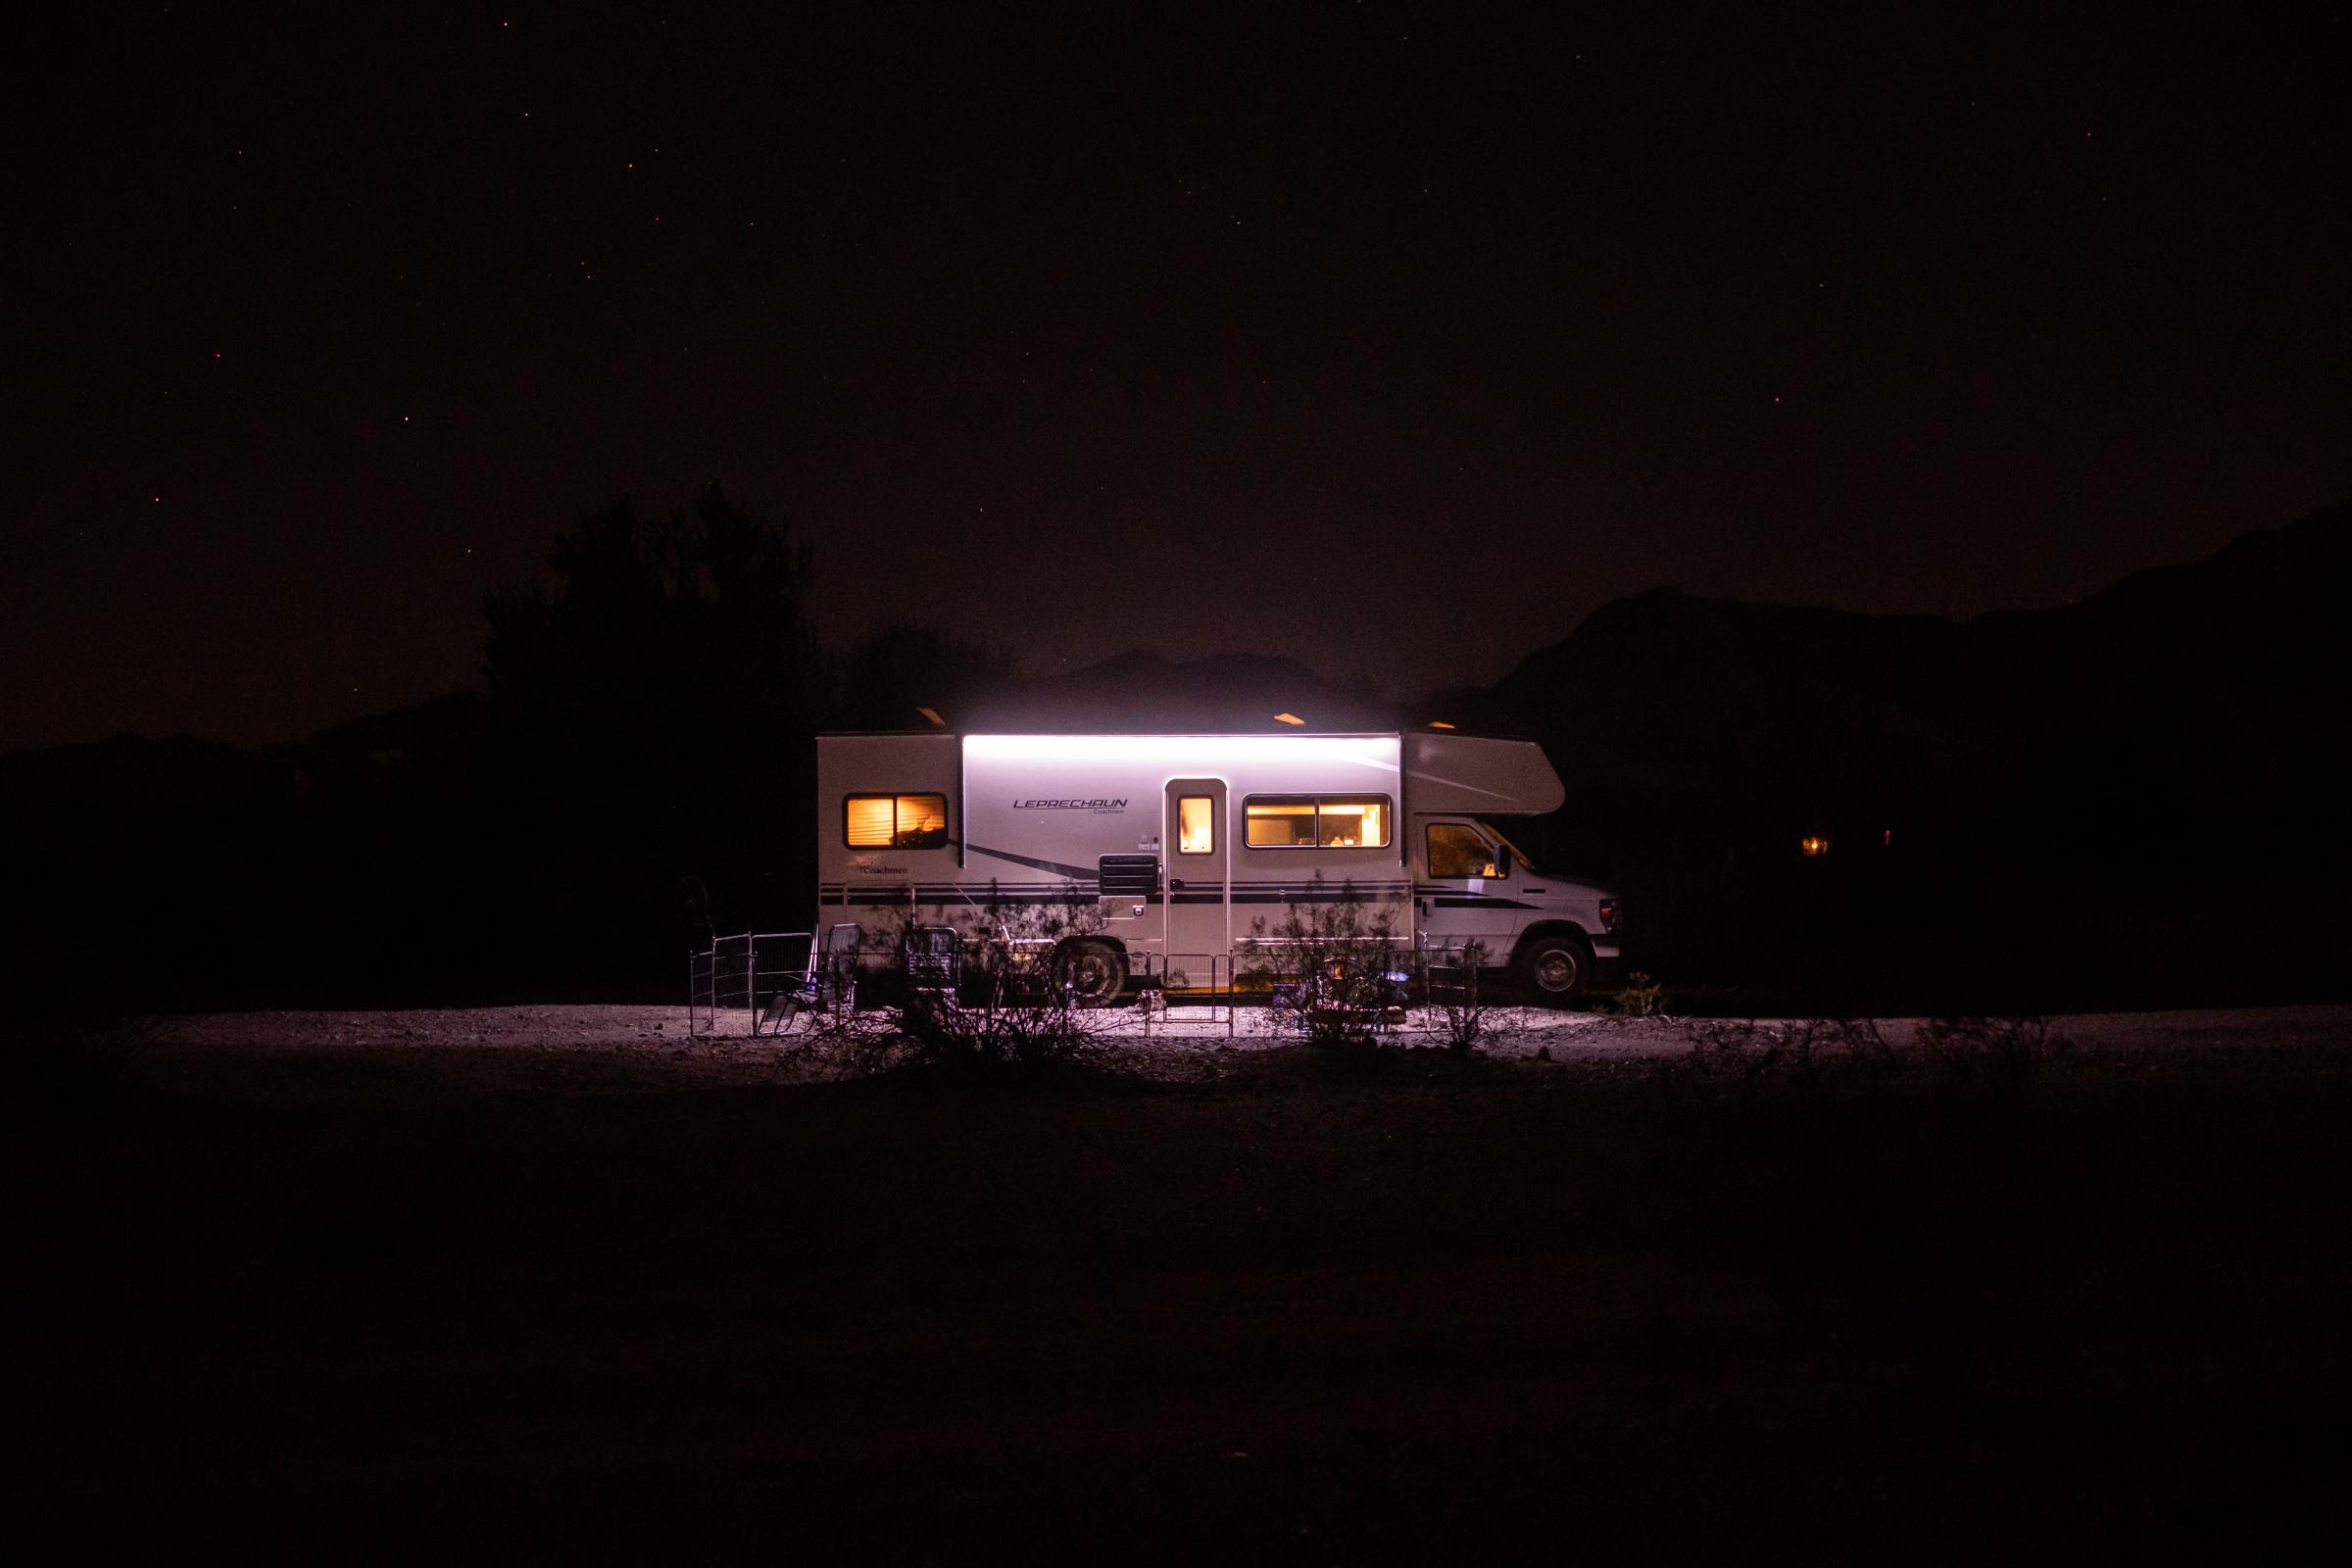 A Warm Winter (An Ongoing Journey) - A portrait of our rig. Quartzsite, Arizona.